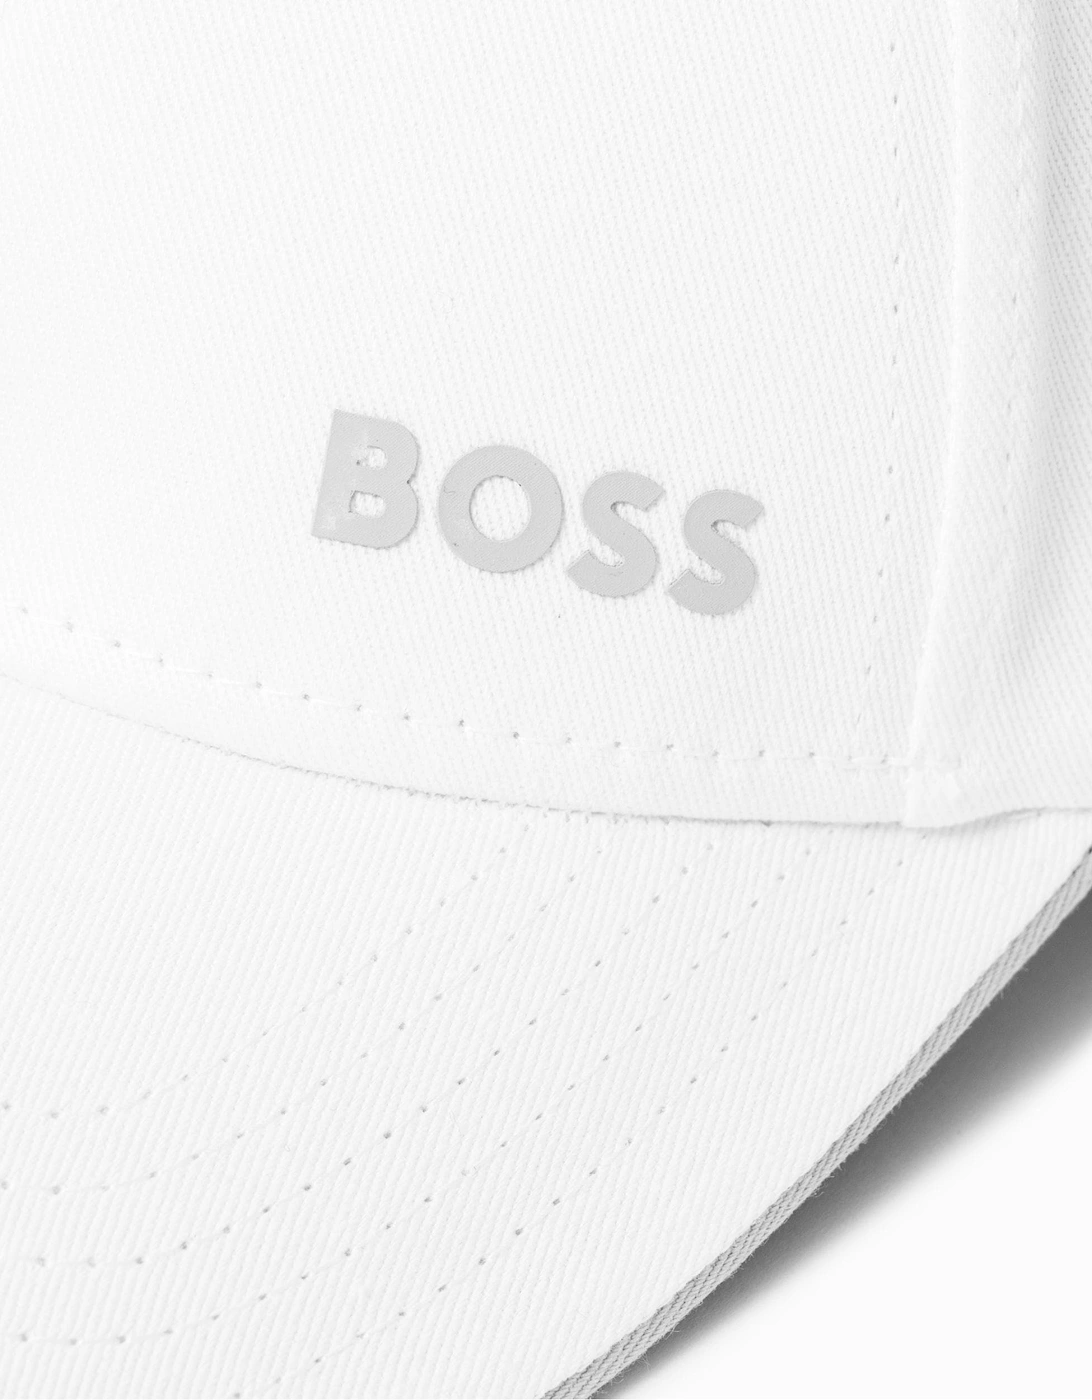 BOSS Green Mens Cotton-Twill Cap with Printed Logo